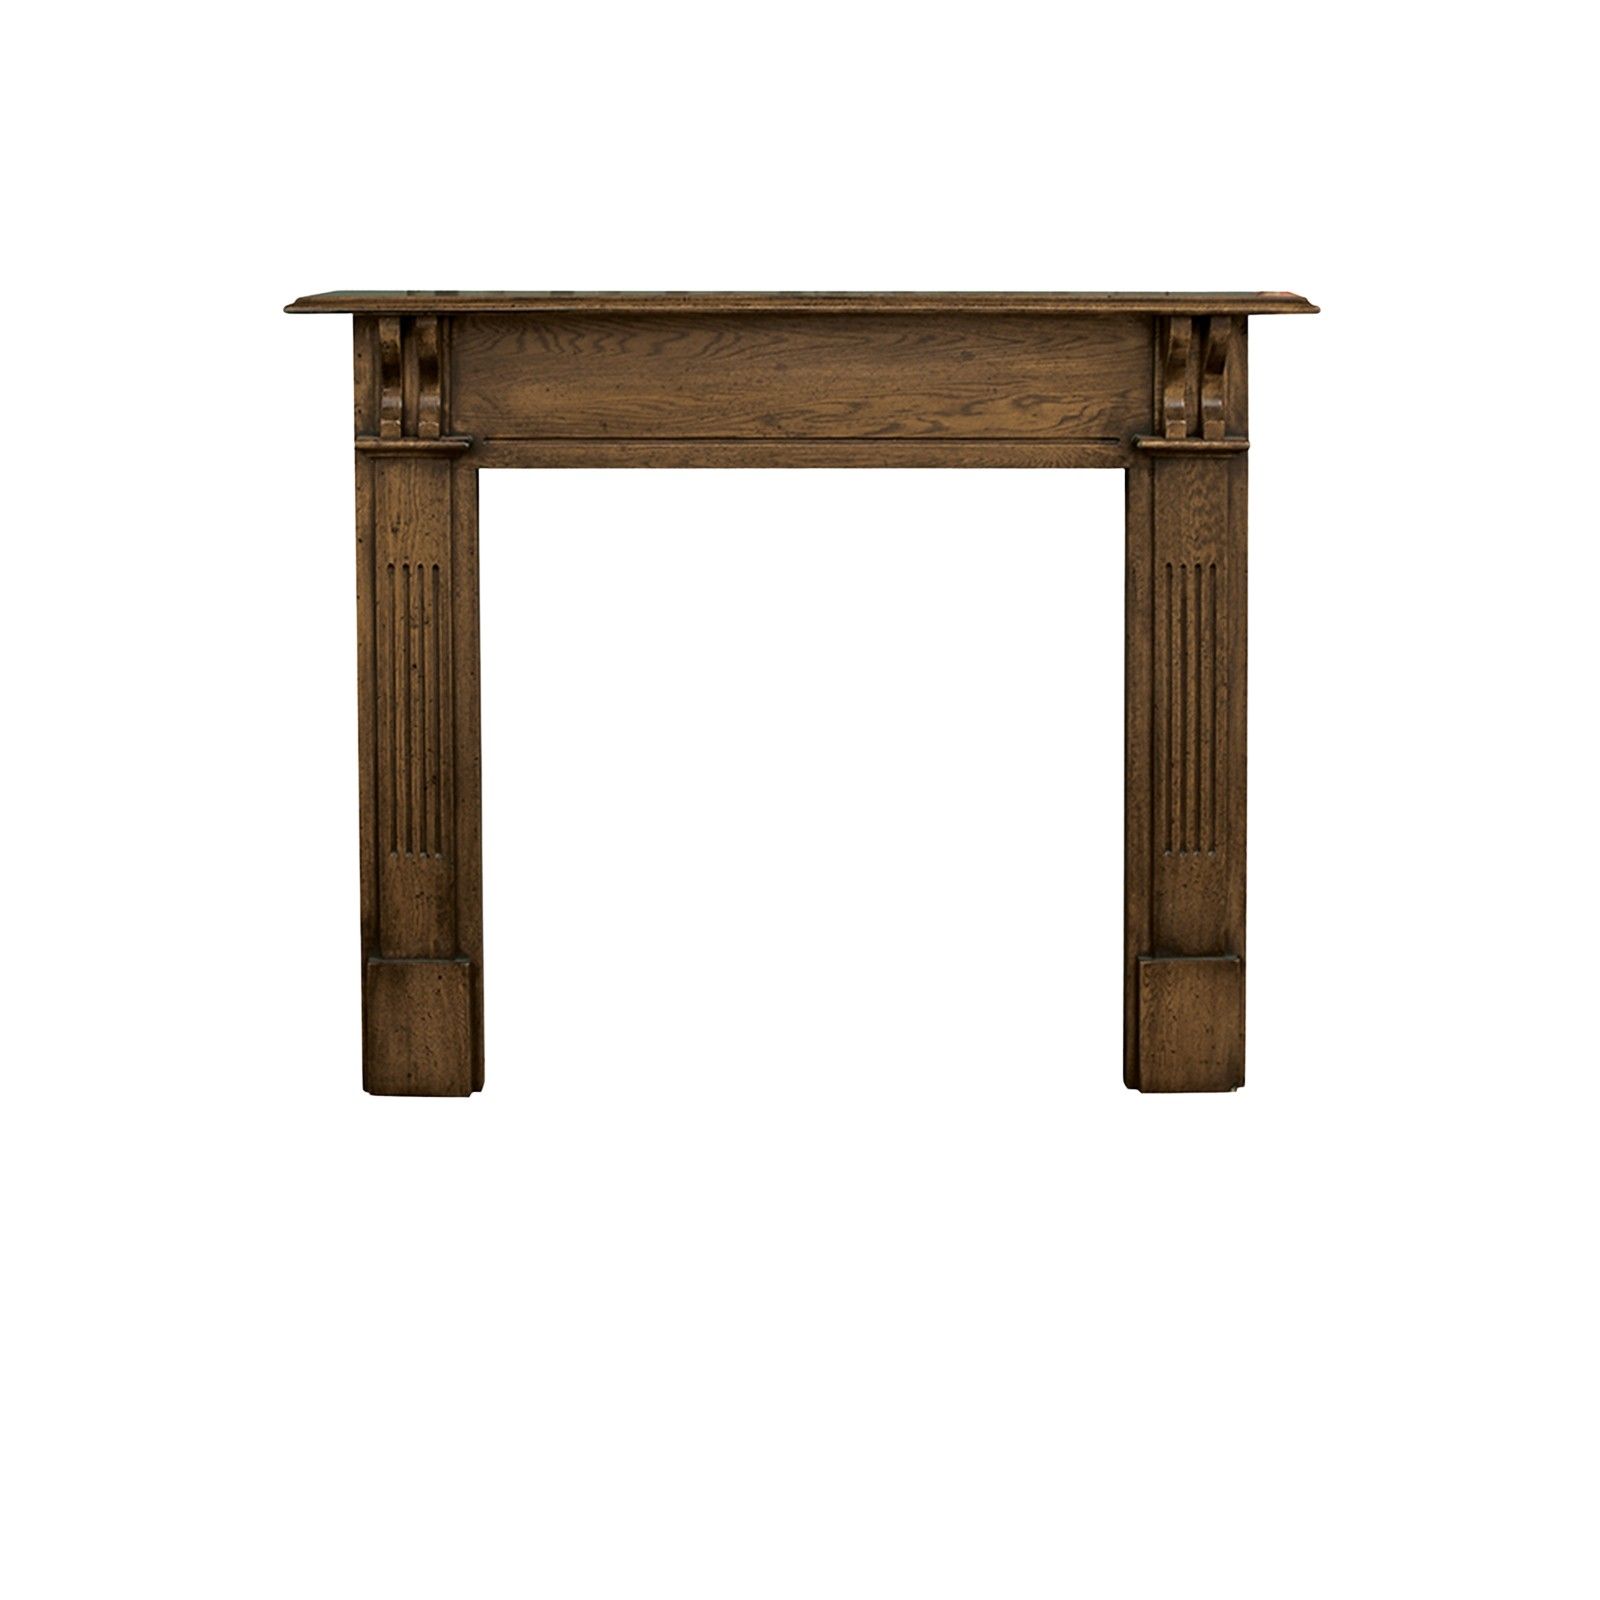 The Earlsfield Wooden Fireplace surround in a distressed finish